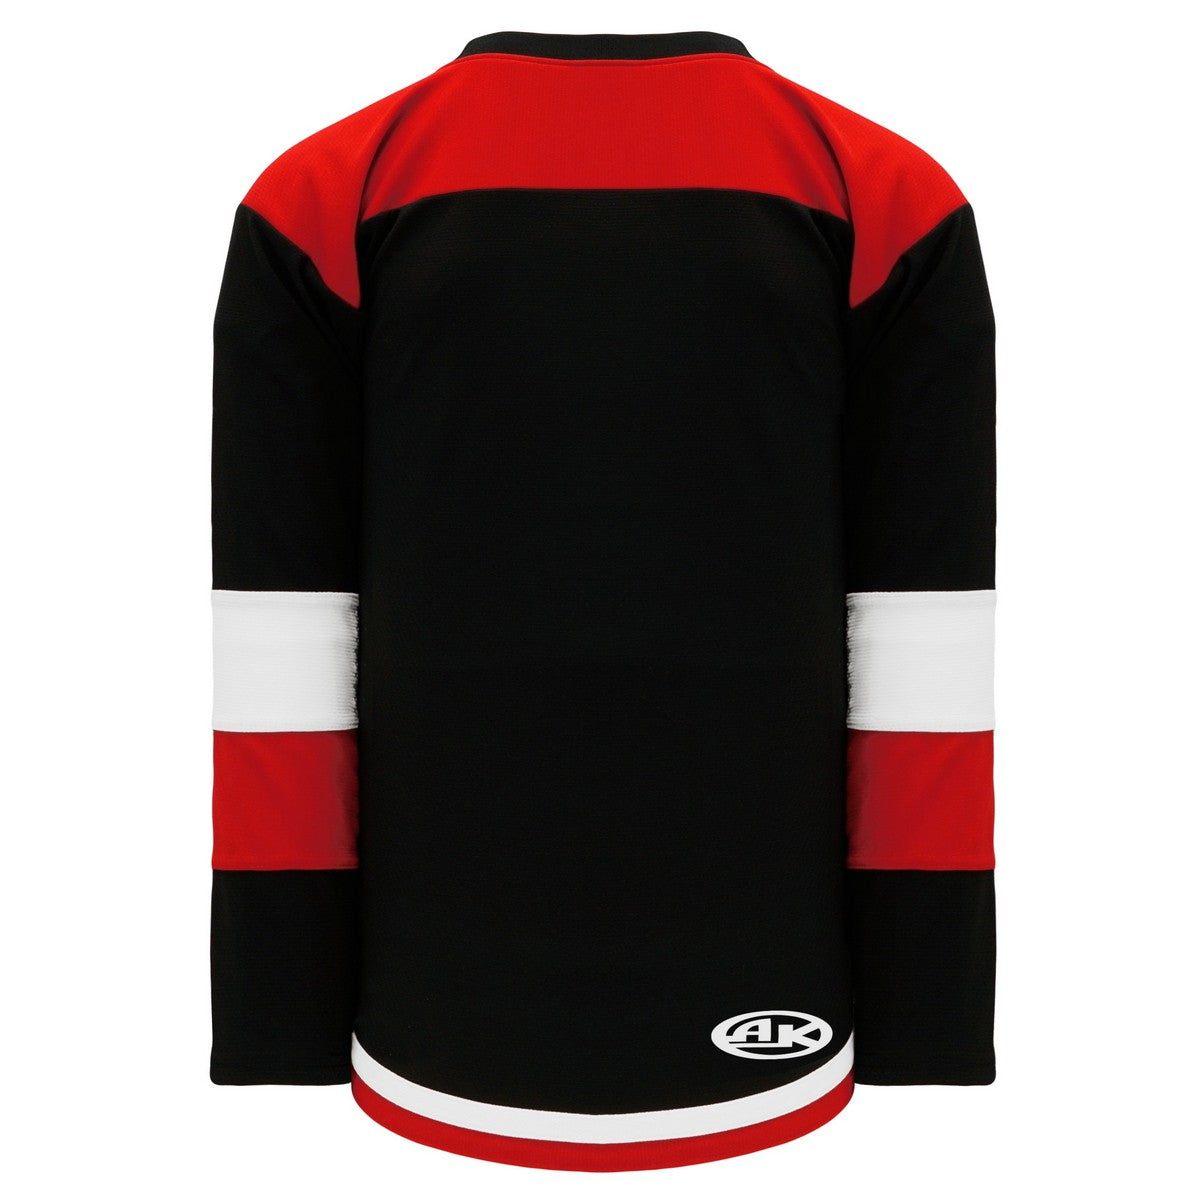 Select Series H7400 Jersey Black-Red